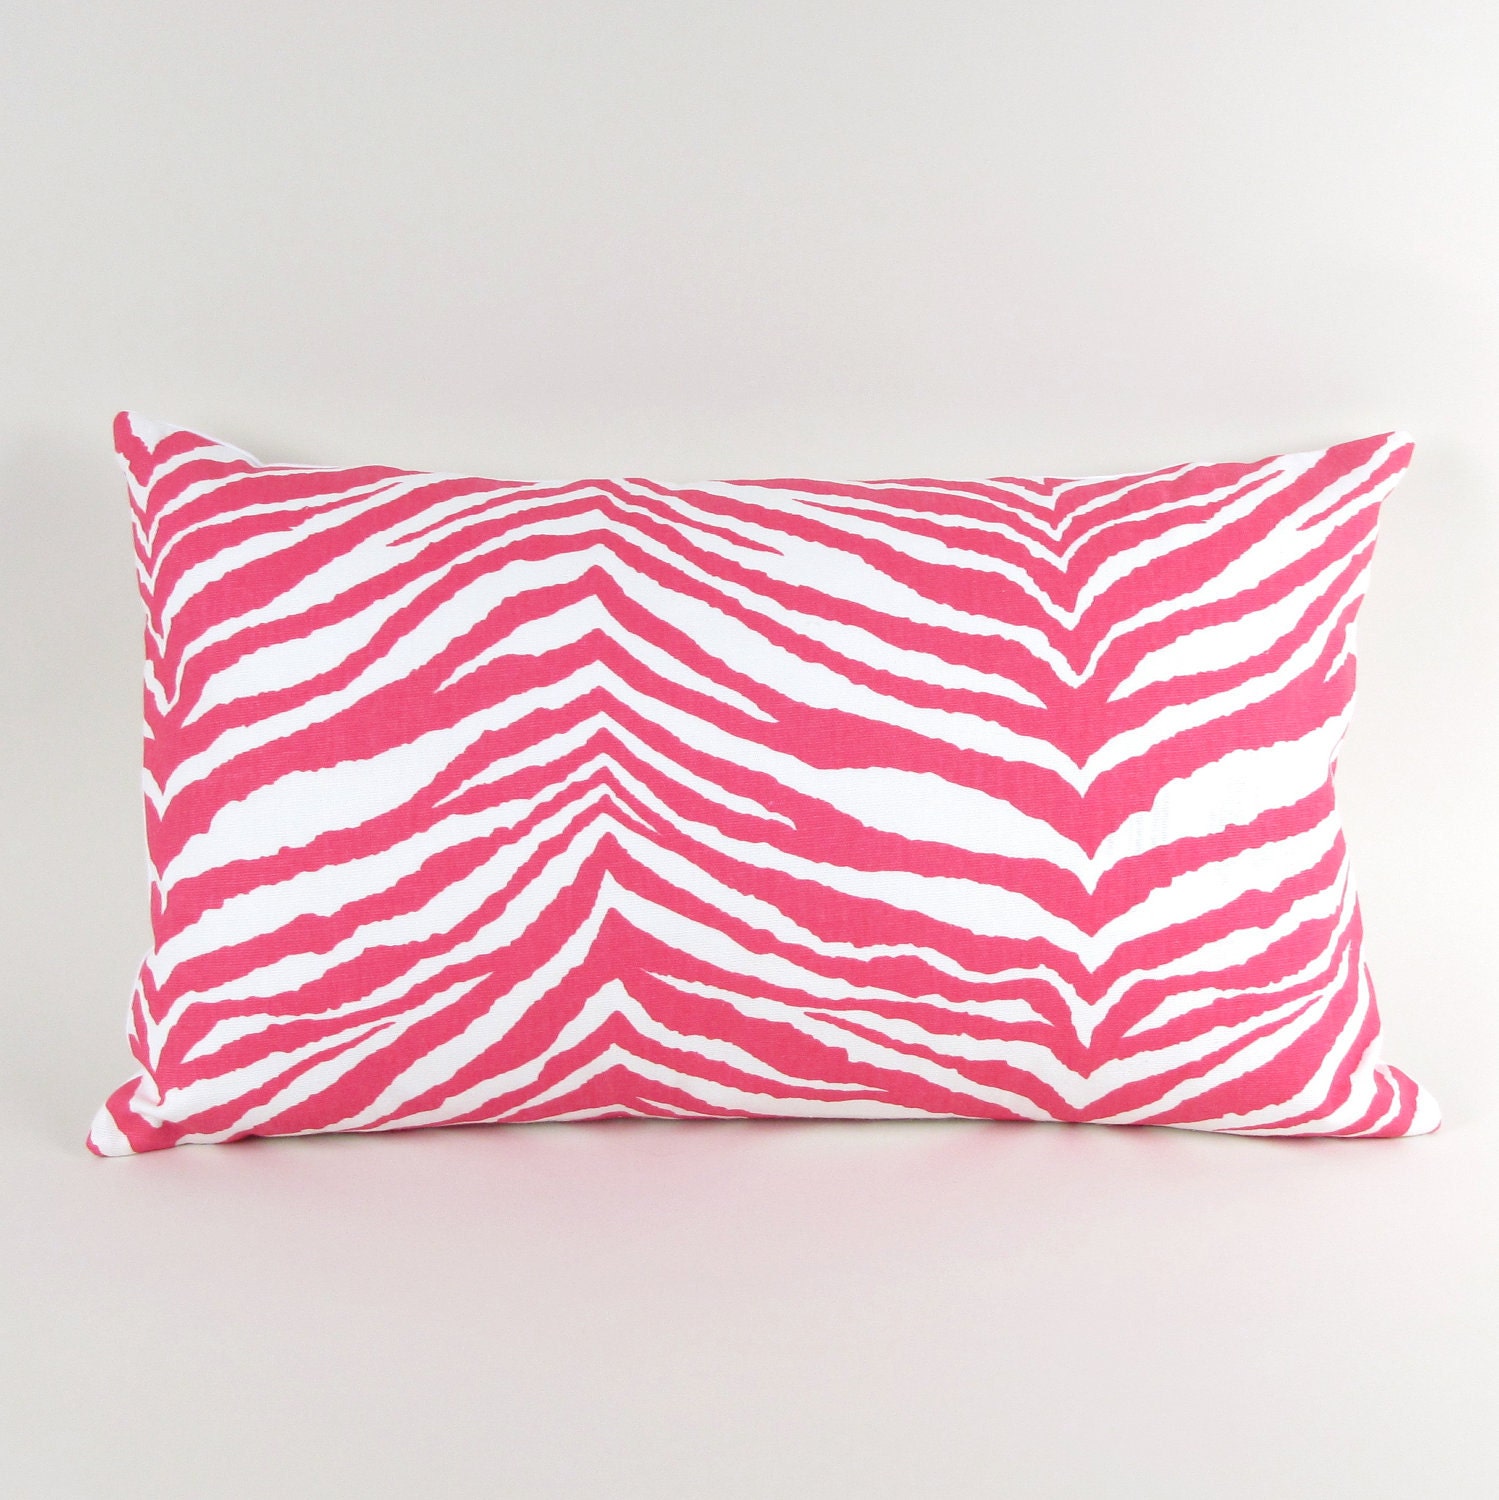 Hot Pink Zebra Pillow Cover 12 by 20 inch by MiCasaBella on Etsy